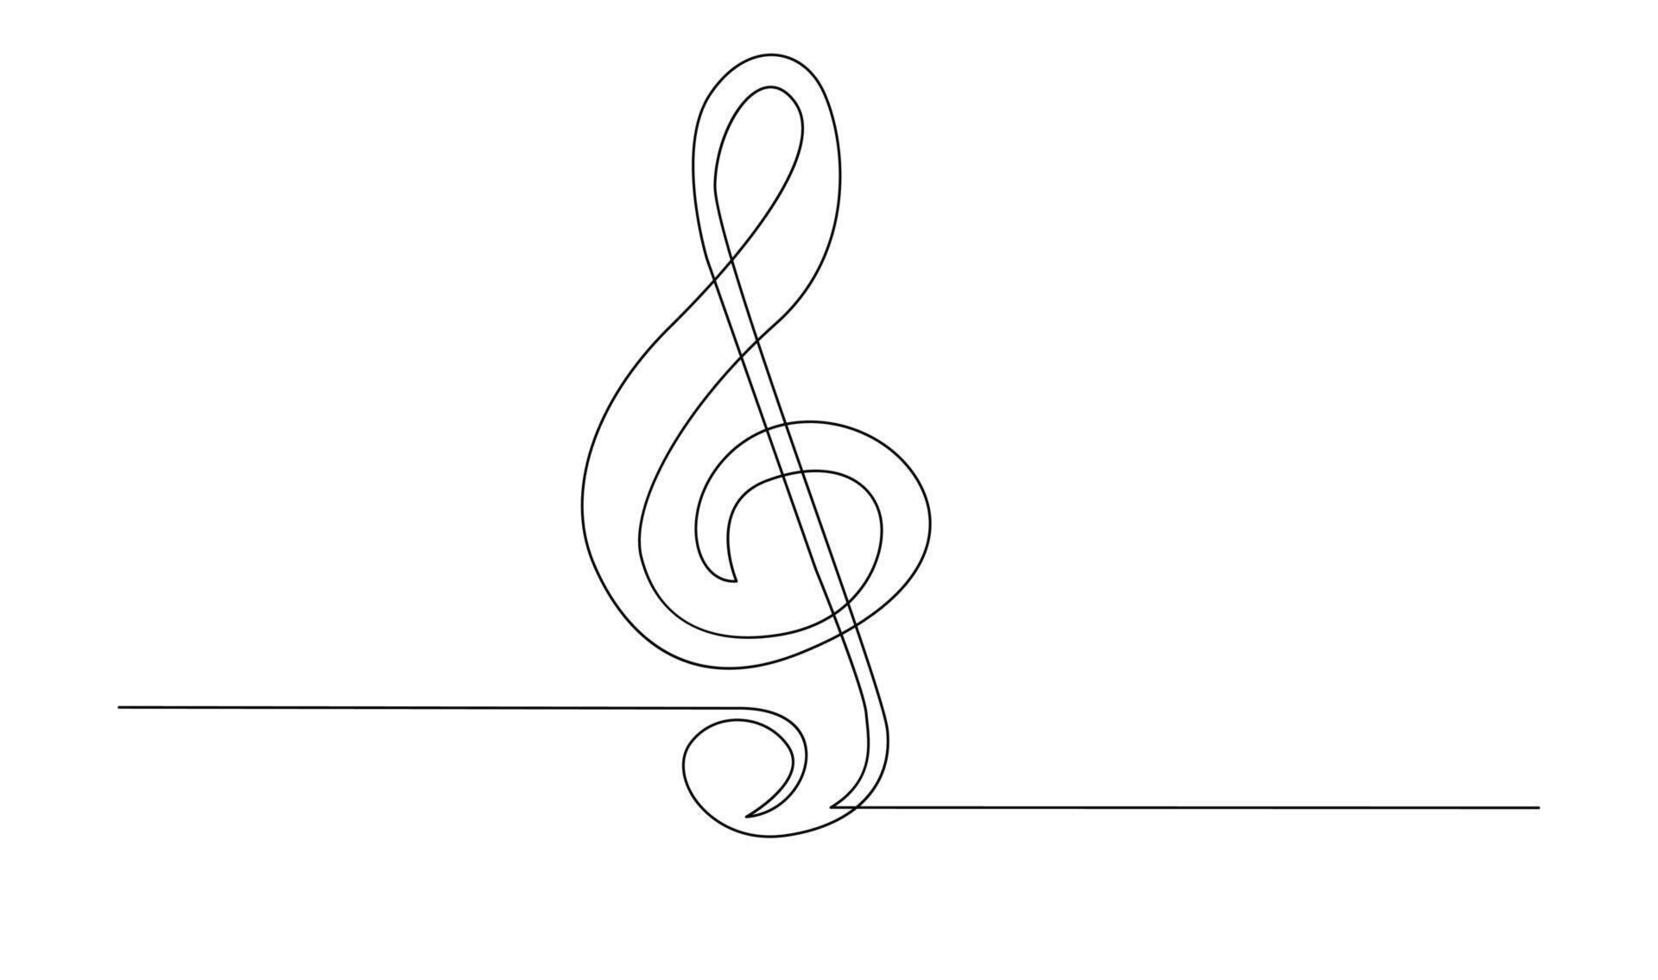 continuous single line drawing of music notes vector